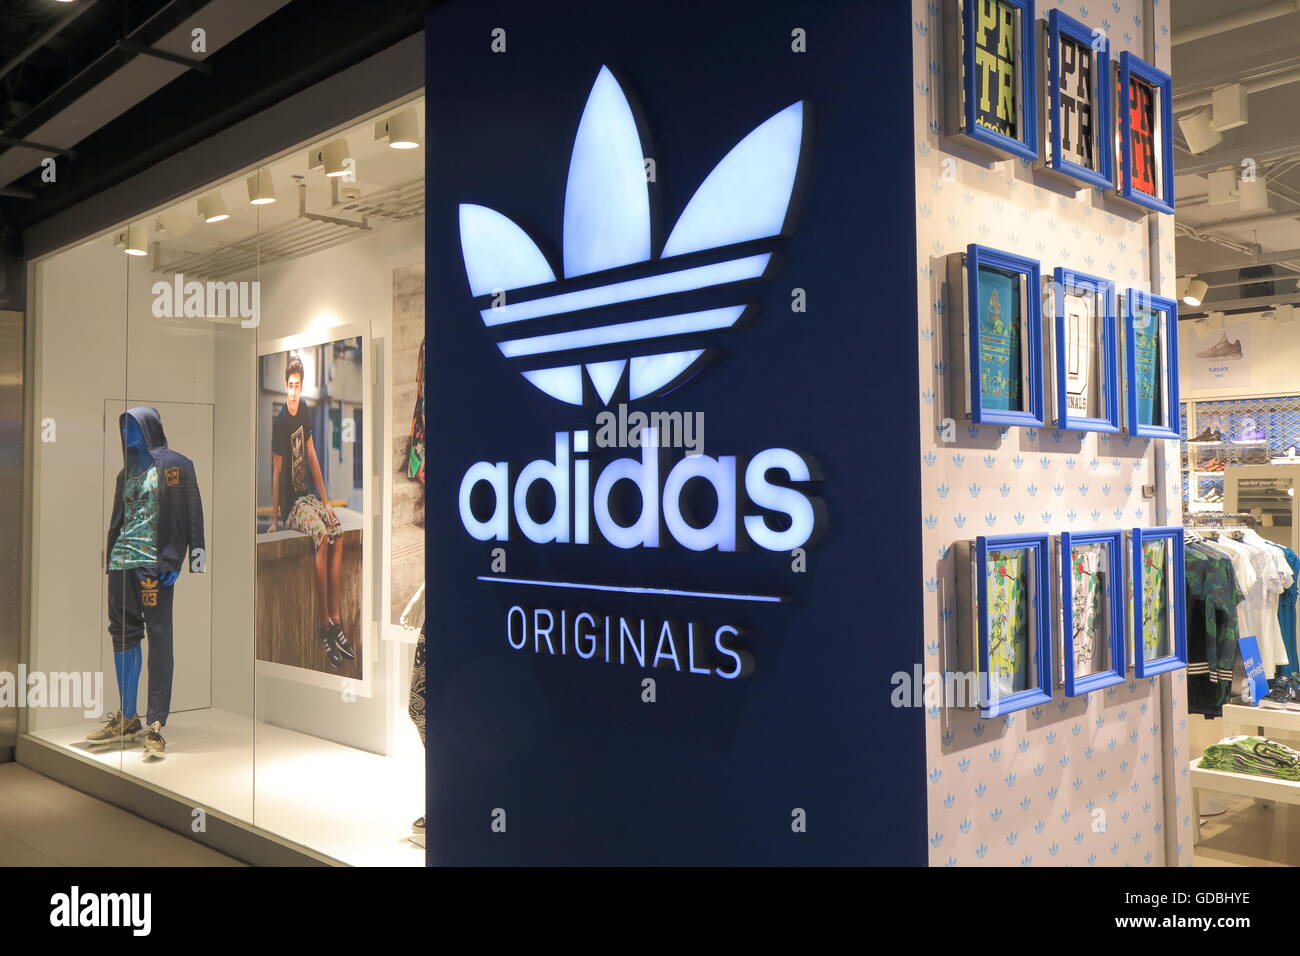 Stores That Sell Adidas Clothing, Buy Now, Outlet, 54% OFF, osatokisalud.com